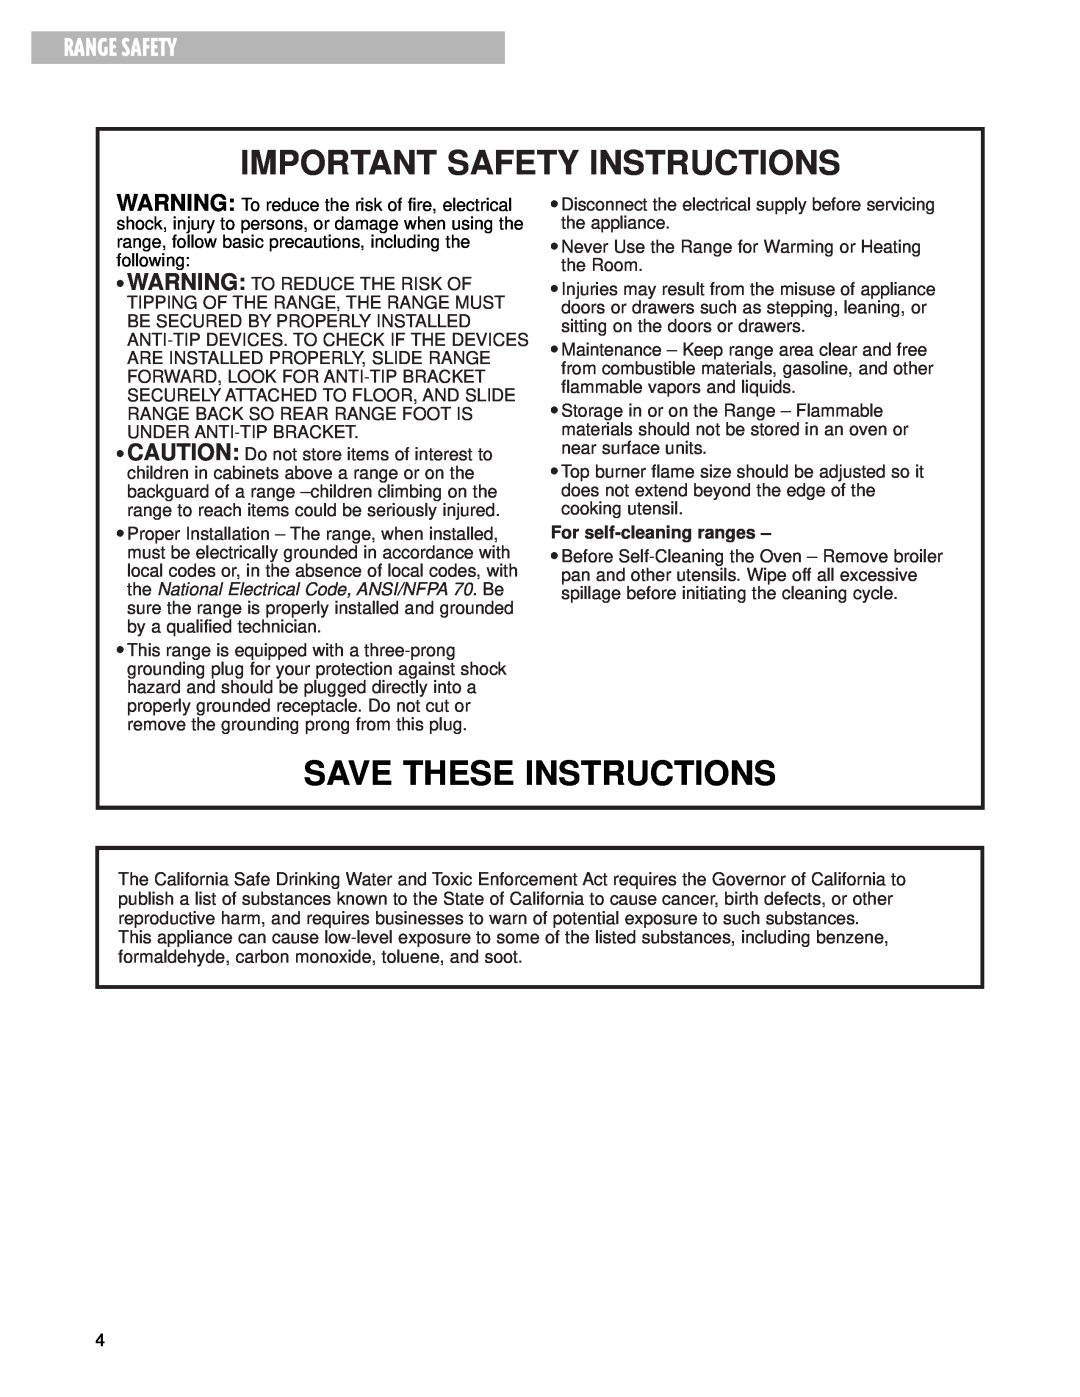 Whirlpool GS395LEG warranty Range Safety, Important Safety Instructions, Save These Instructions 